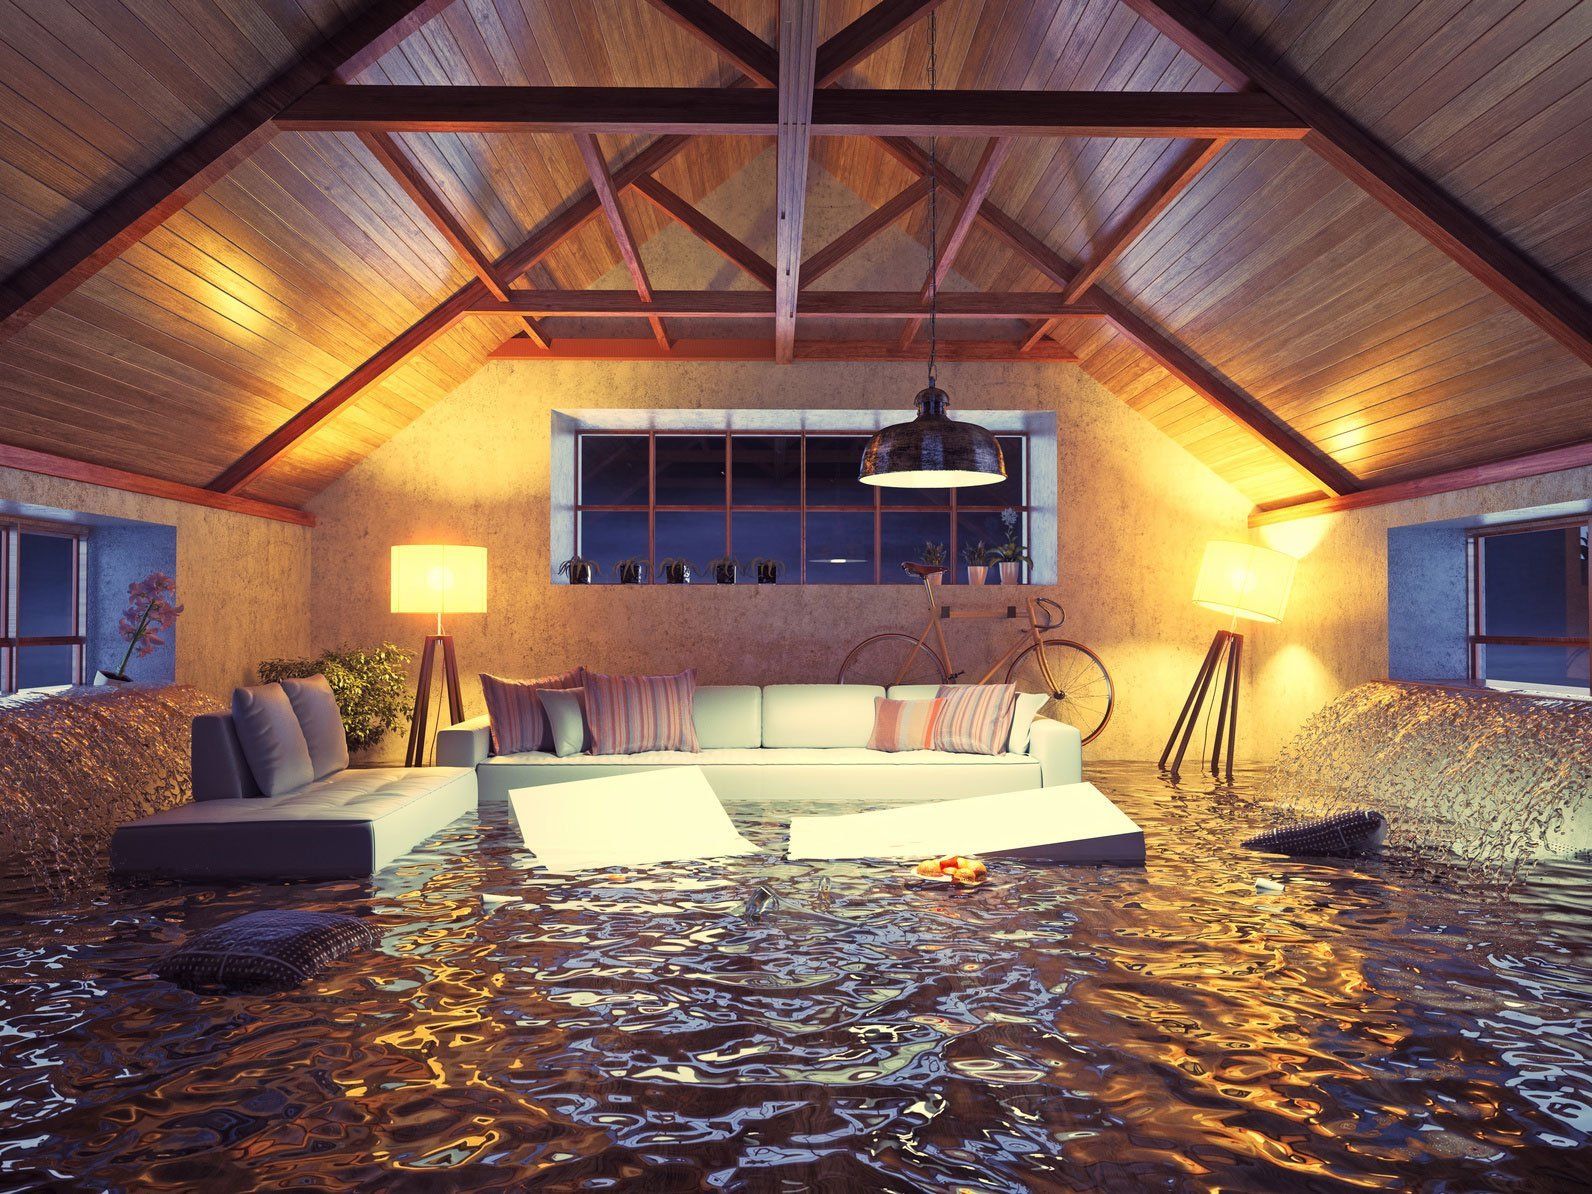 A living room filled with water and a couch.